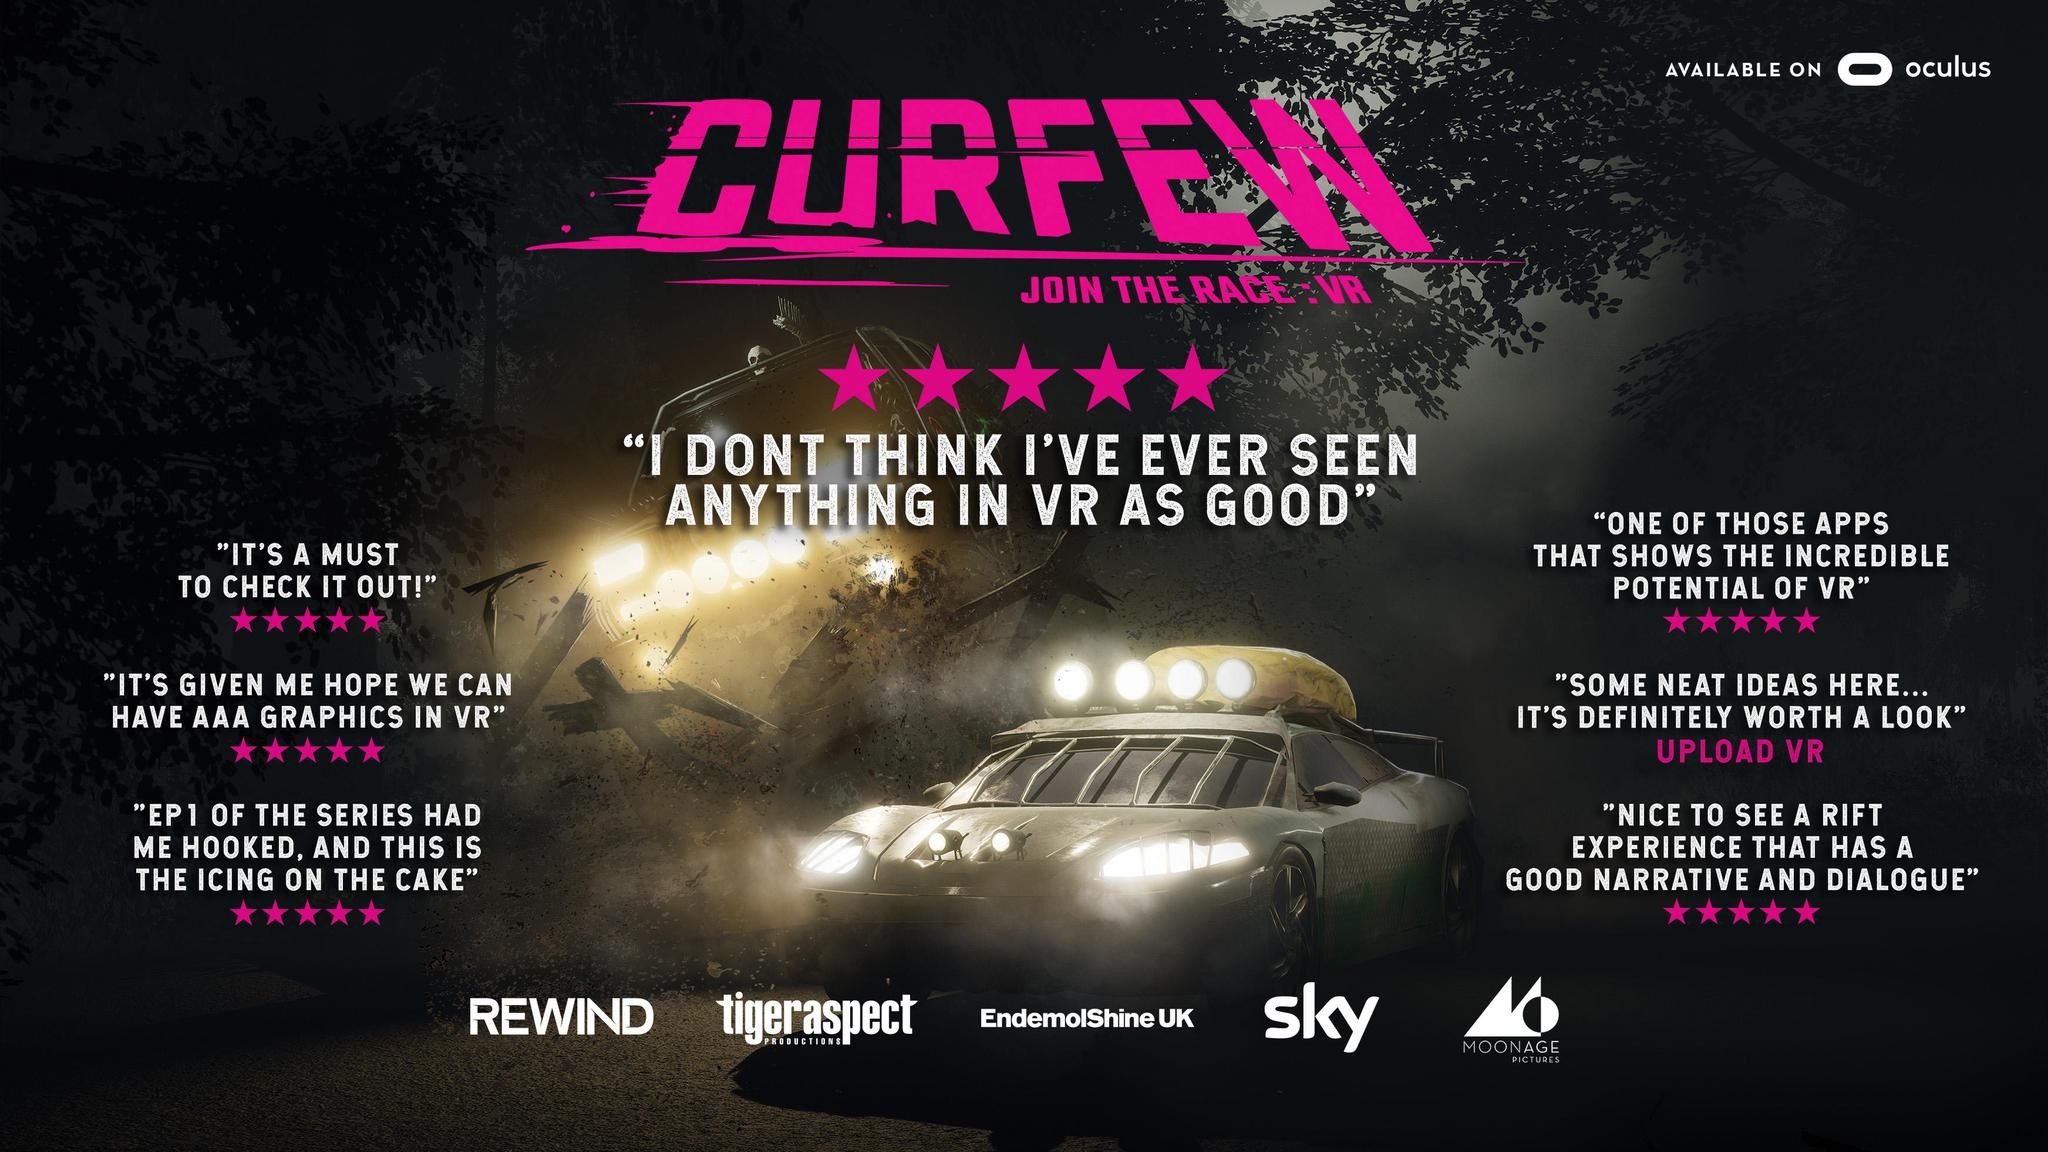 CURFEW: JOIN THE RACE VR